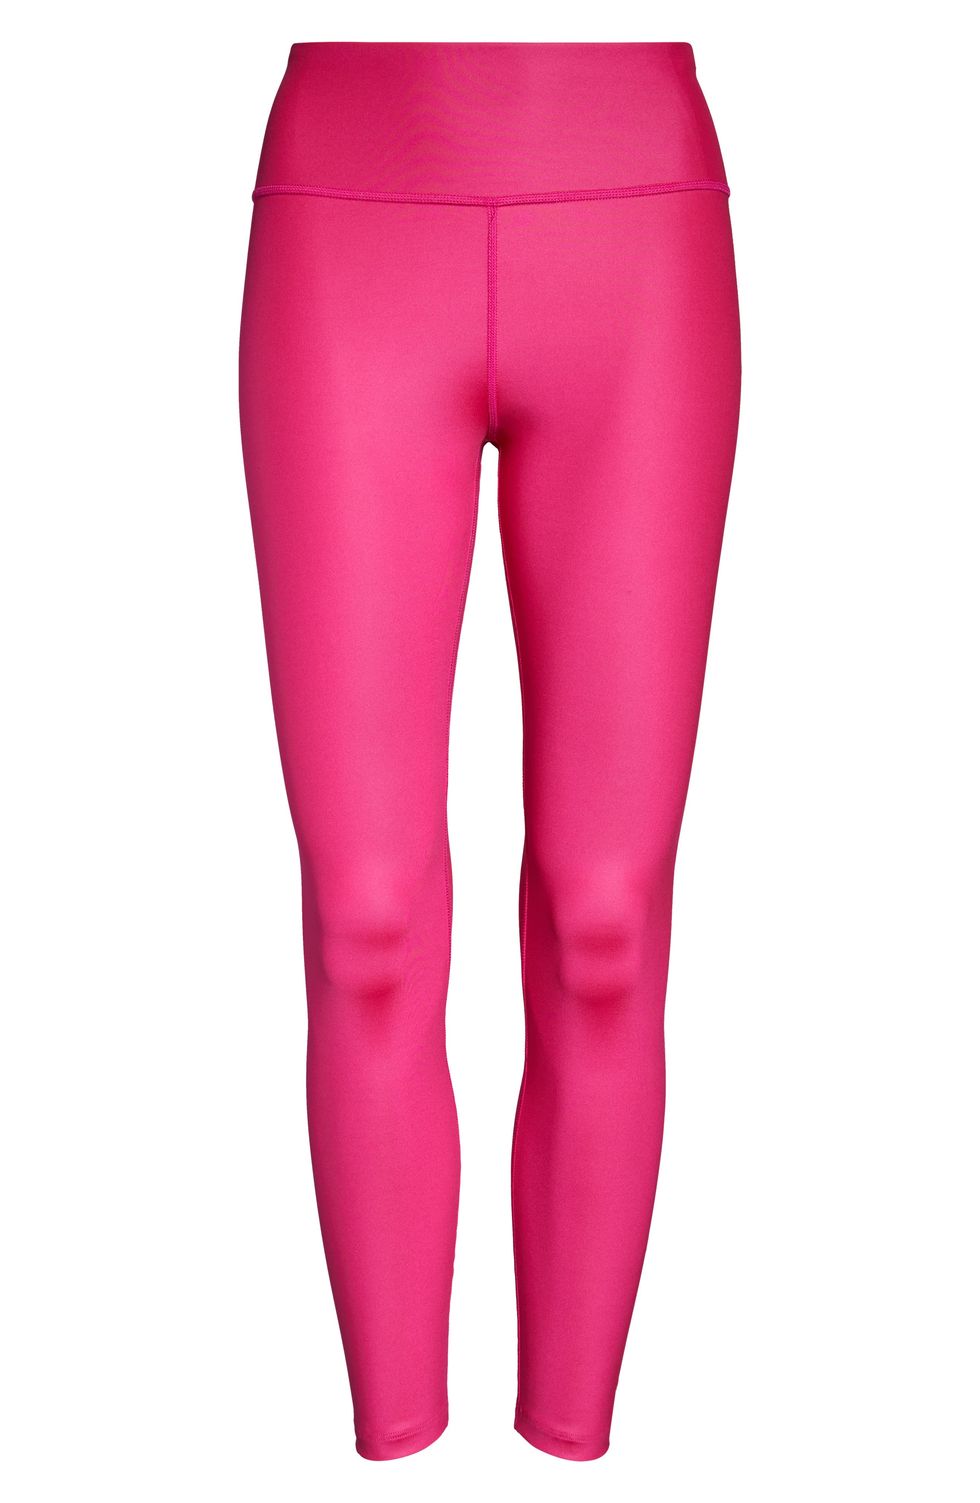 Pairadize Faux Leather Leggings NEON Try on Haul Review 